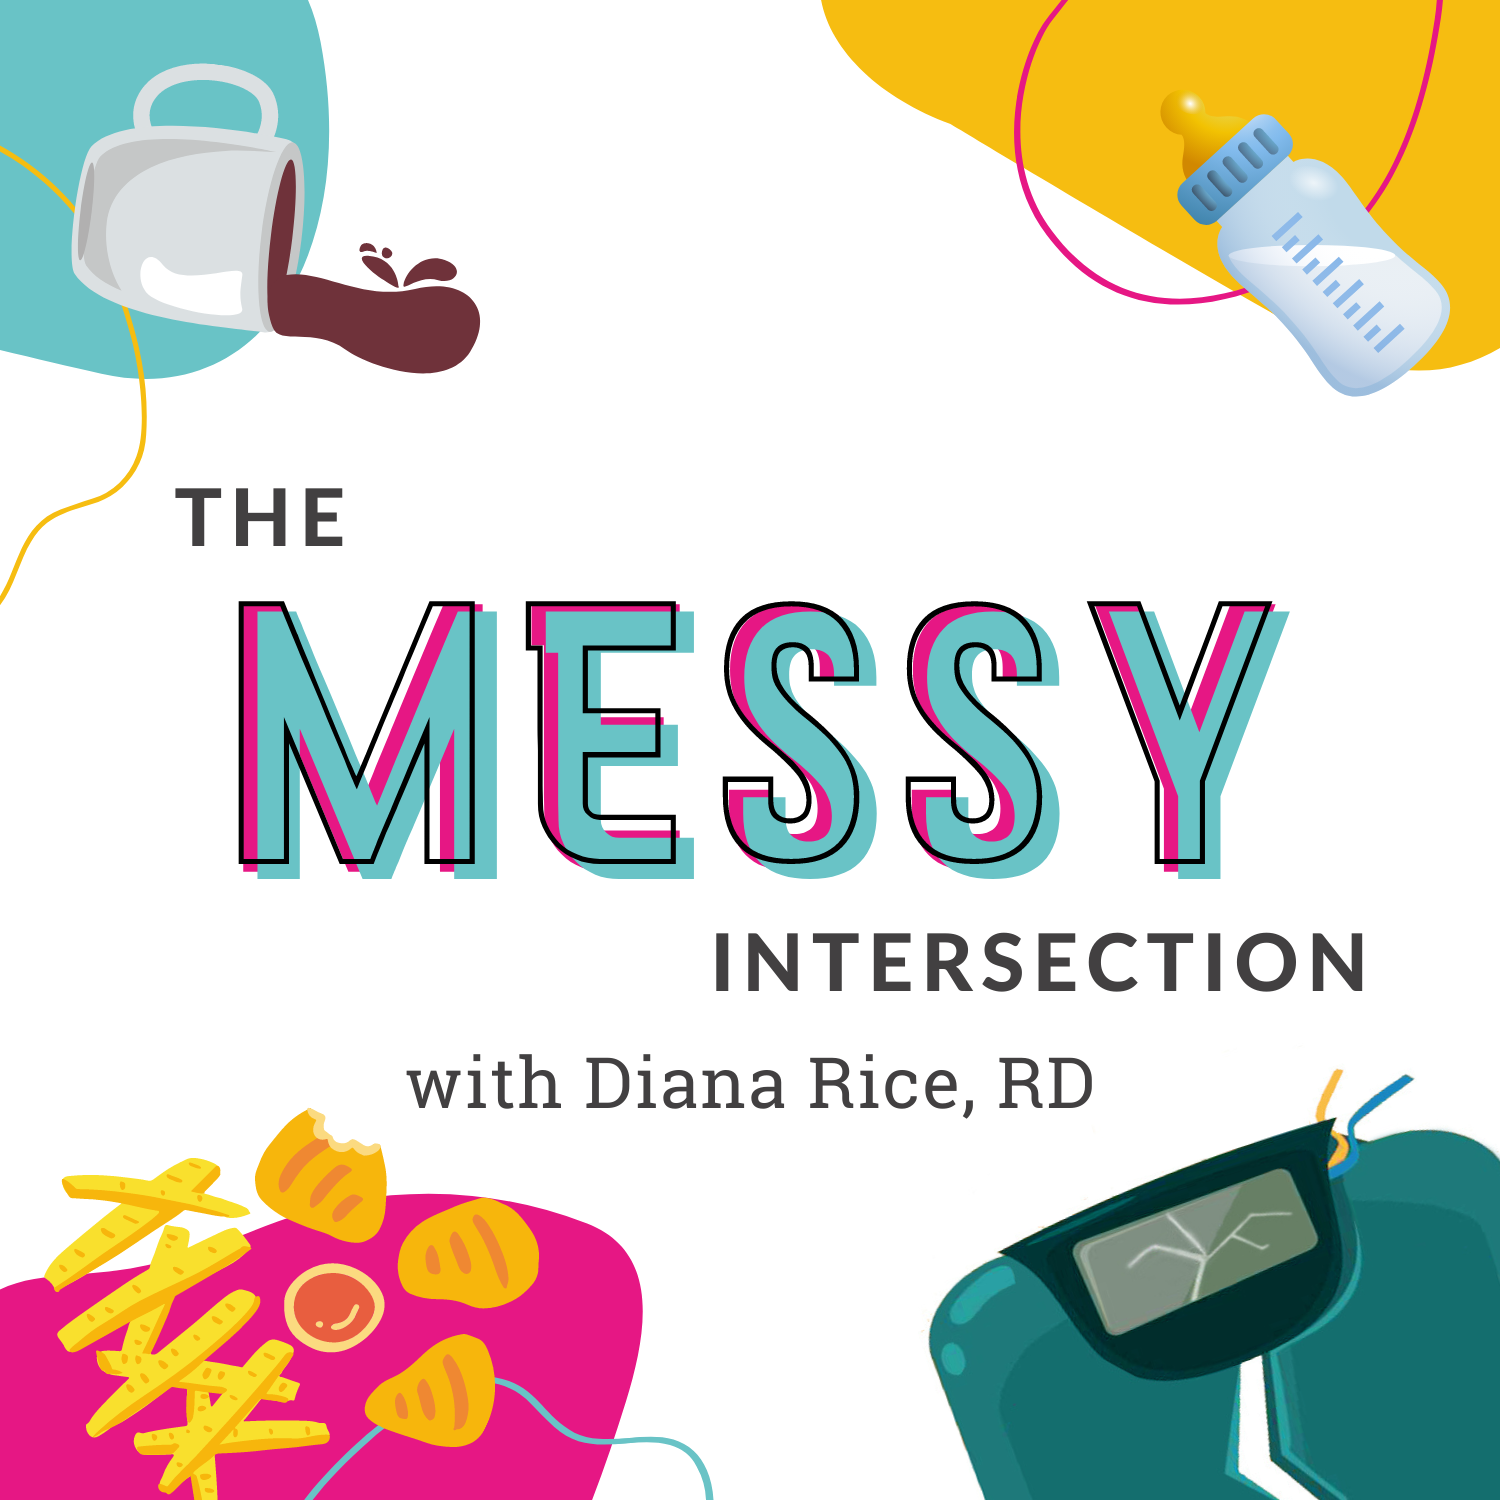 The Messy Intersection